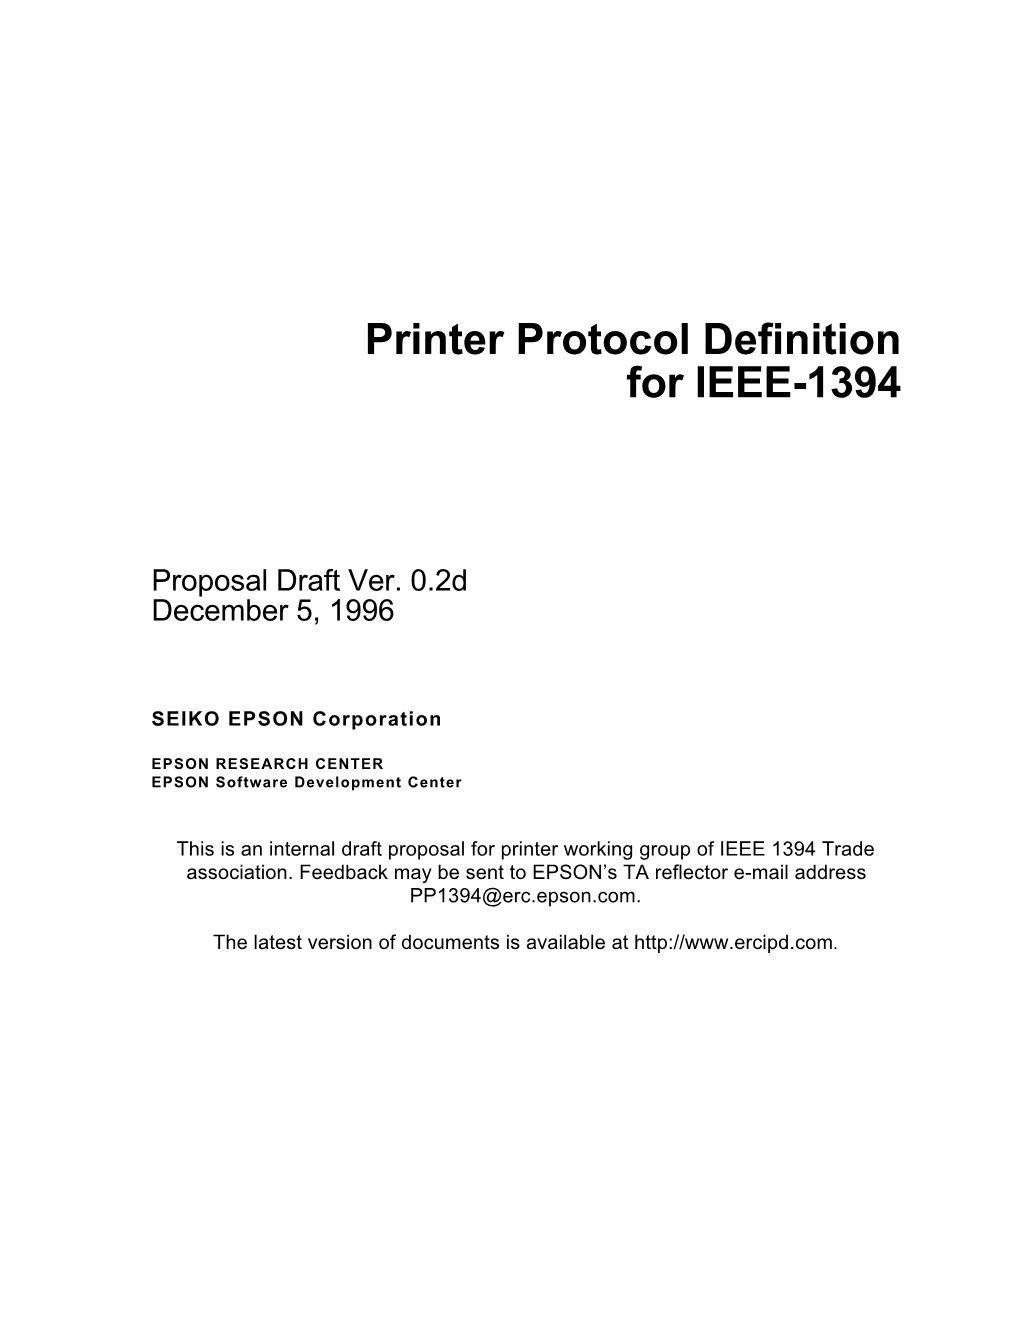 Printer Protocol Definition for IEEE-1394